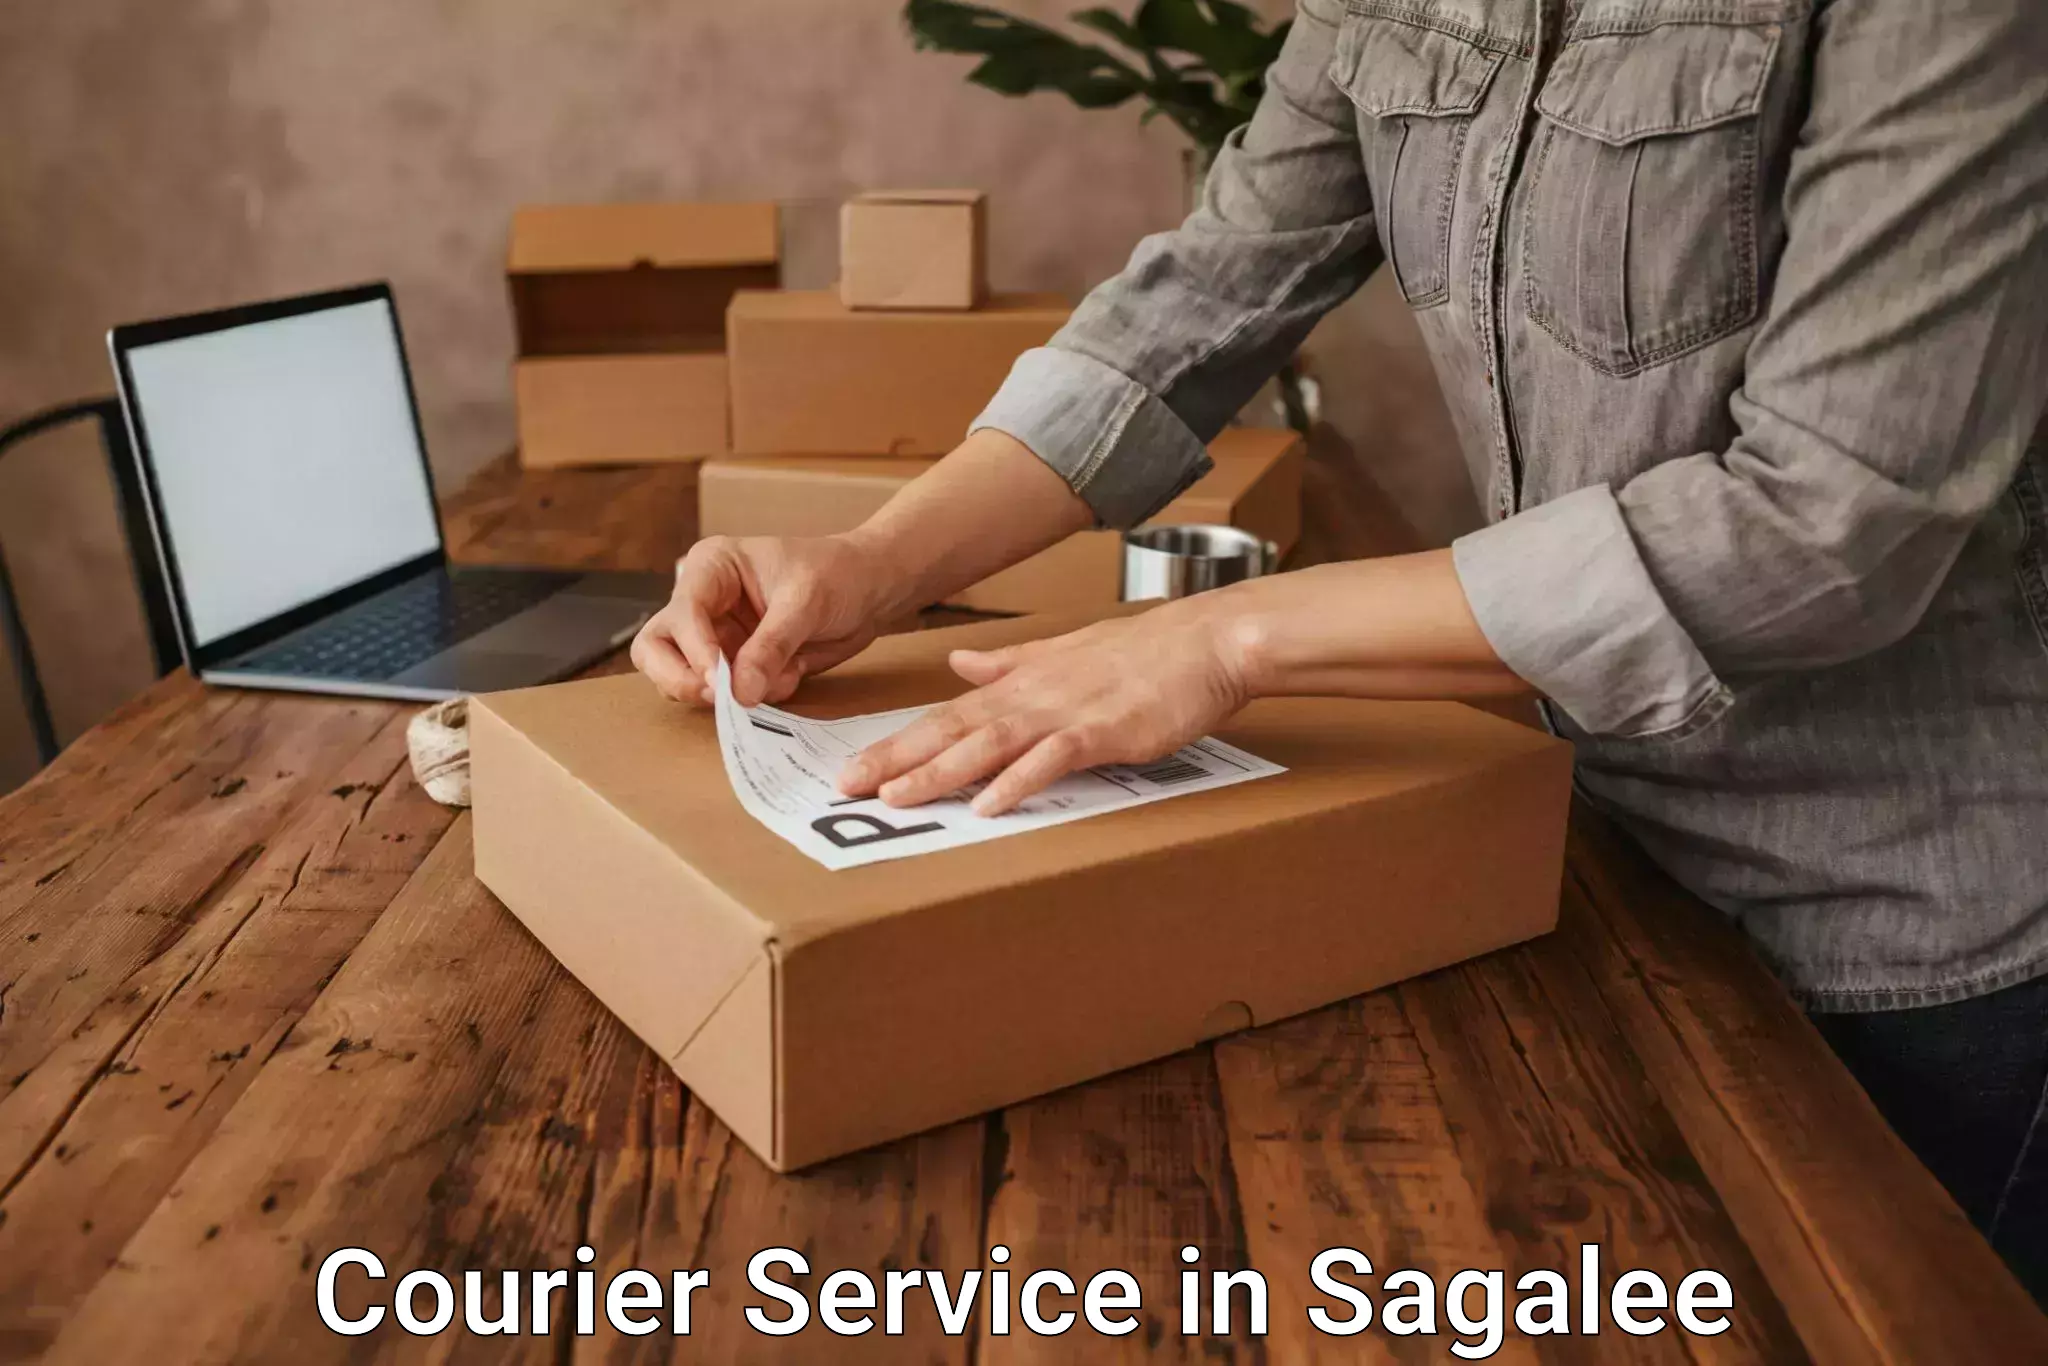 24-hour courier service in Sagalee